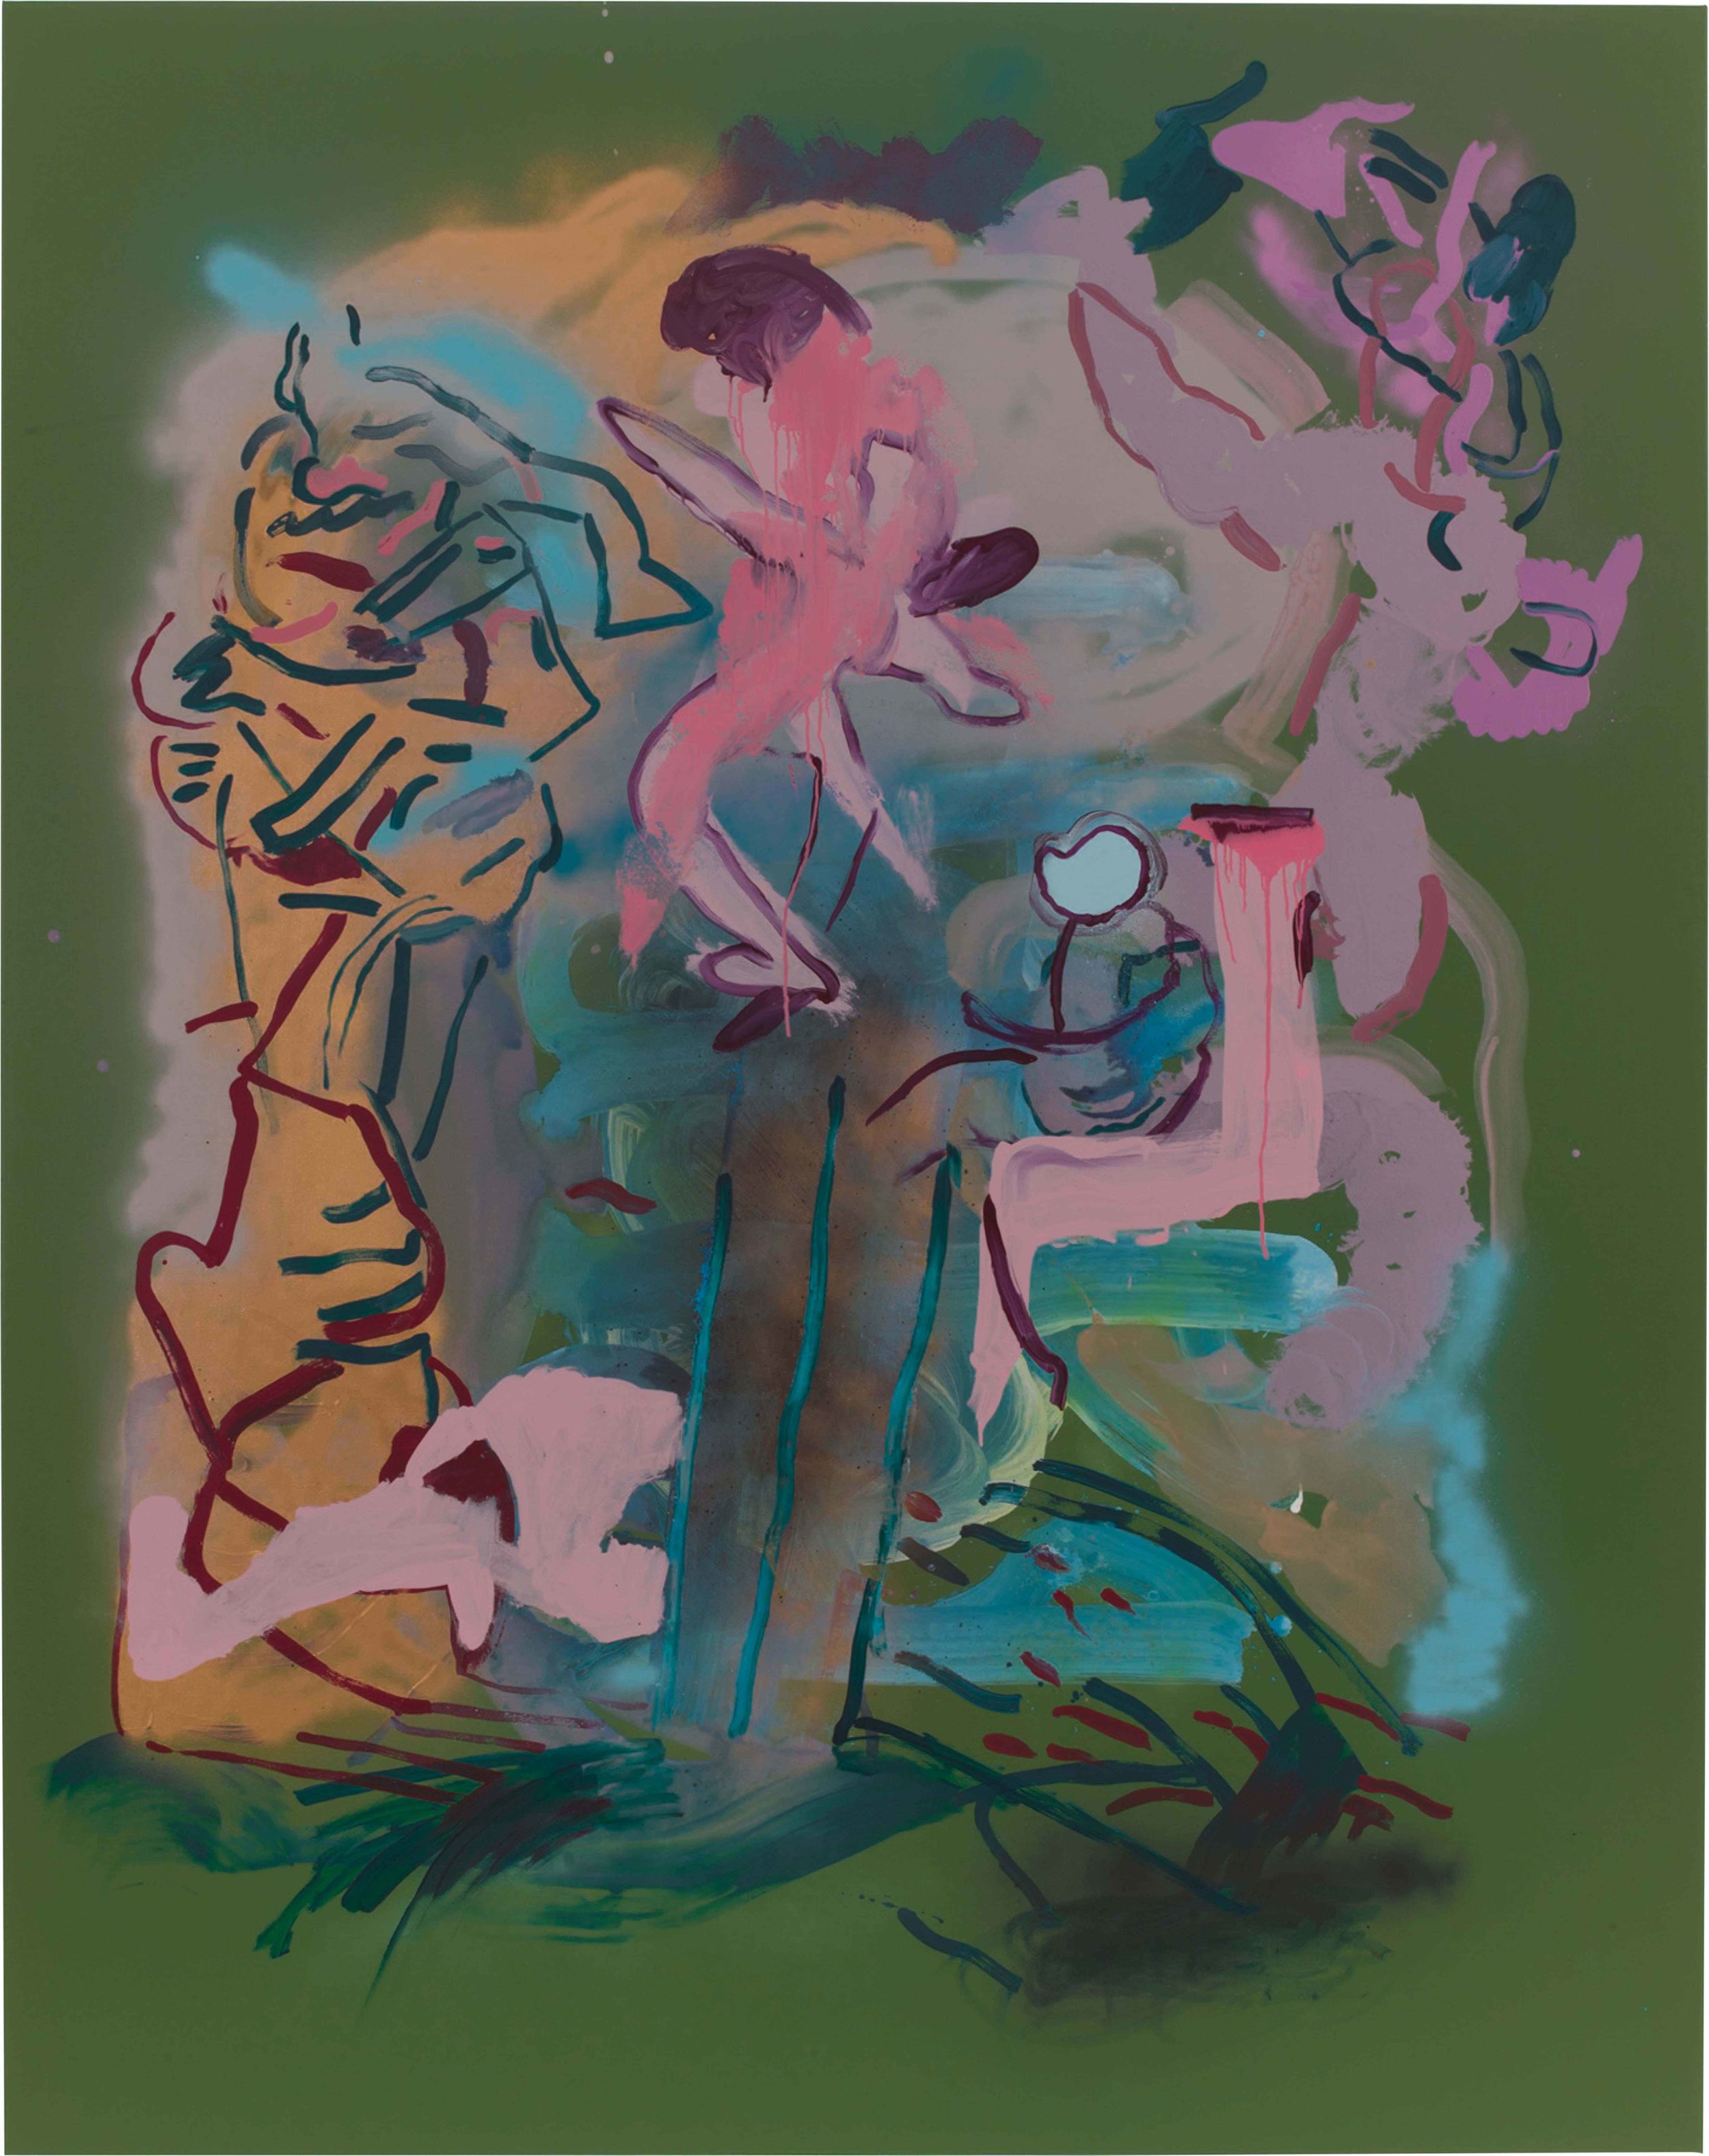  Drew Beattie and Ben Shepard  Boys in Trees  2015 acrylic and spray paint on canvas 96 x 76 inches 